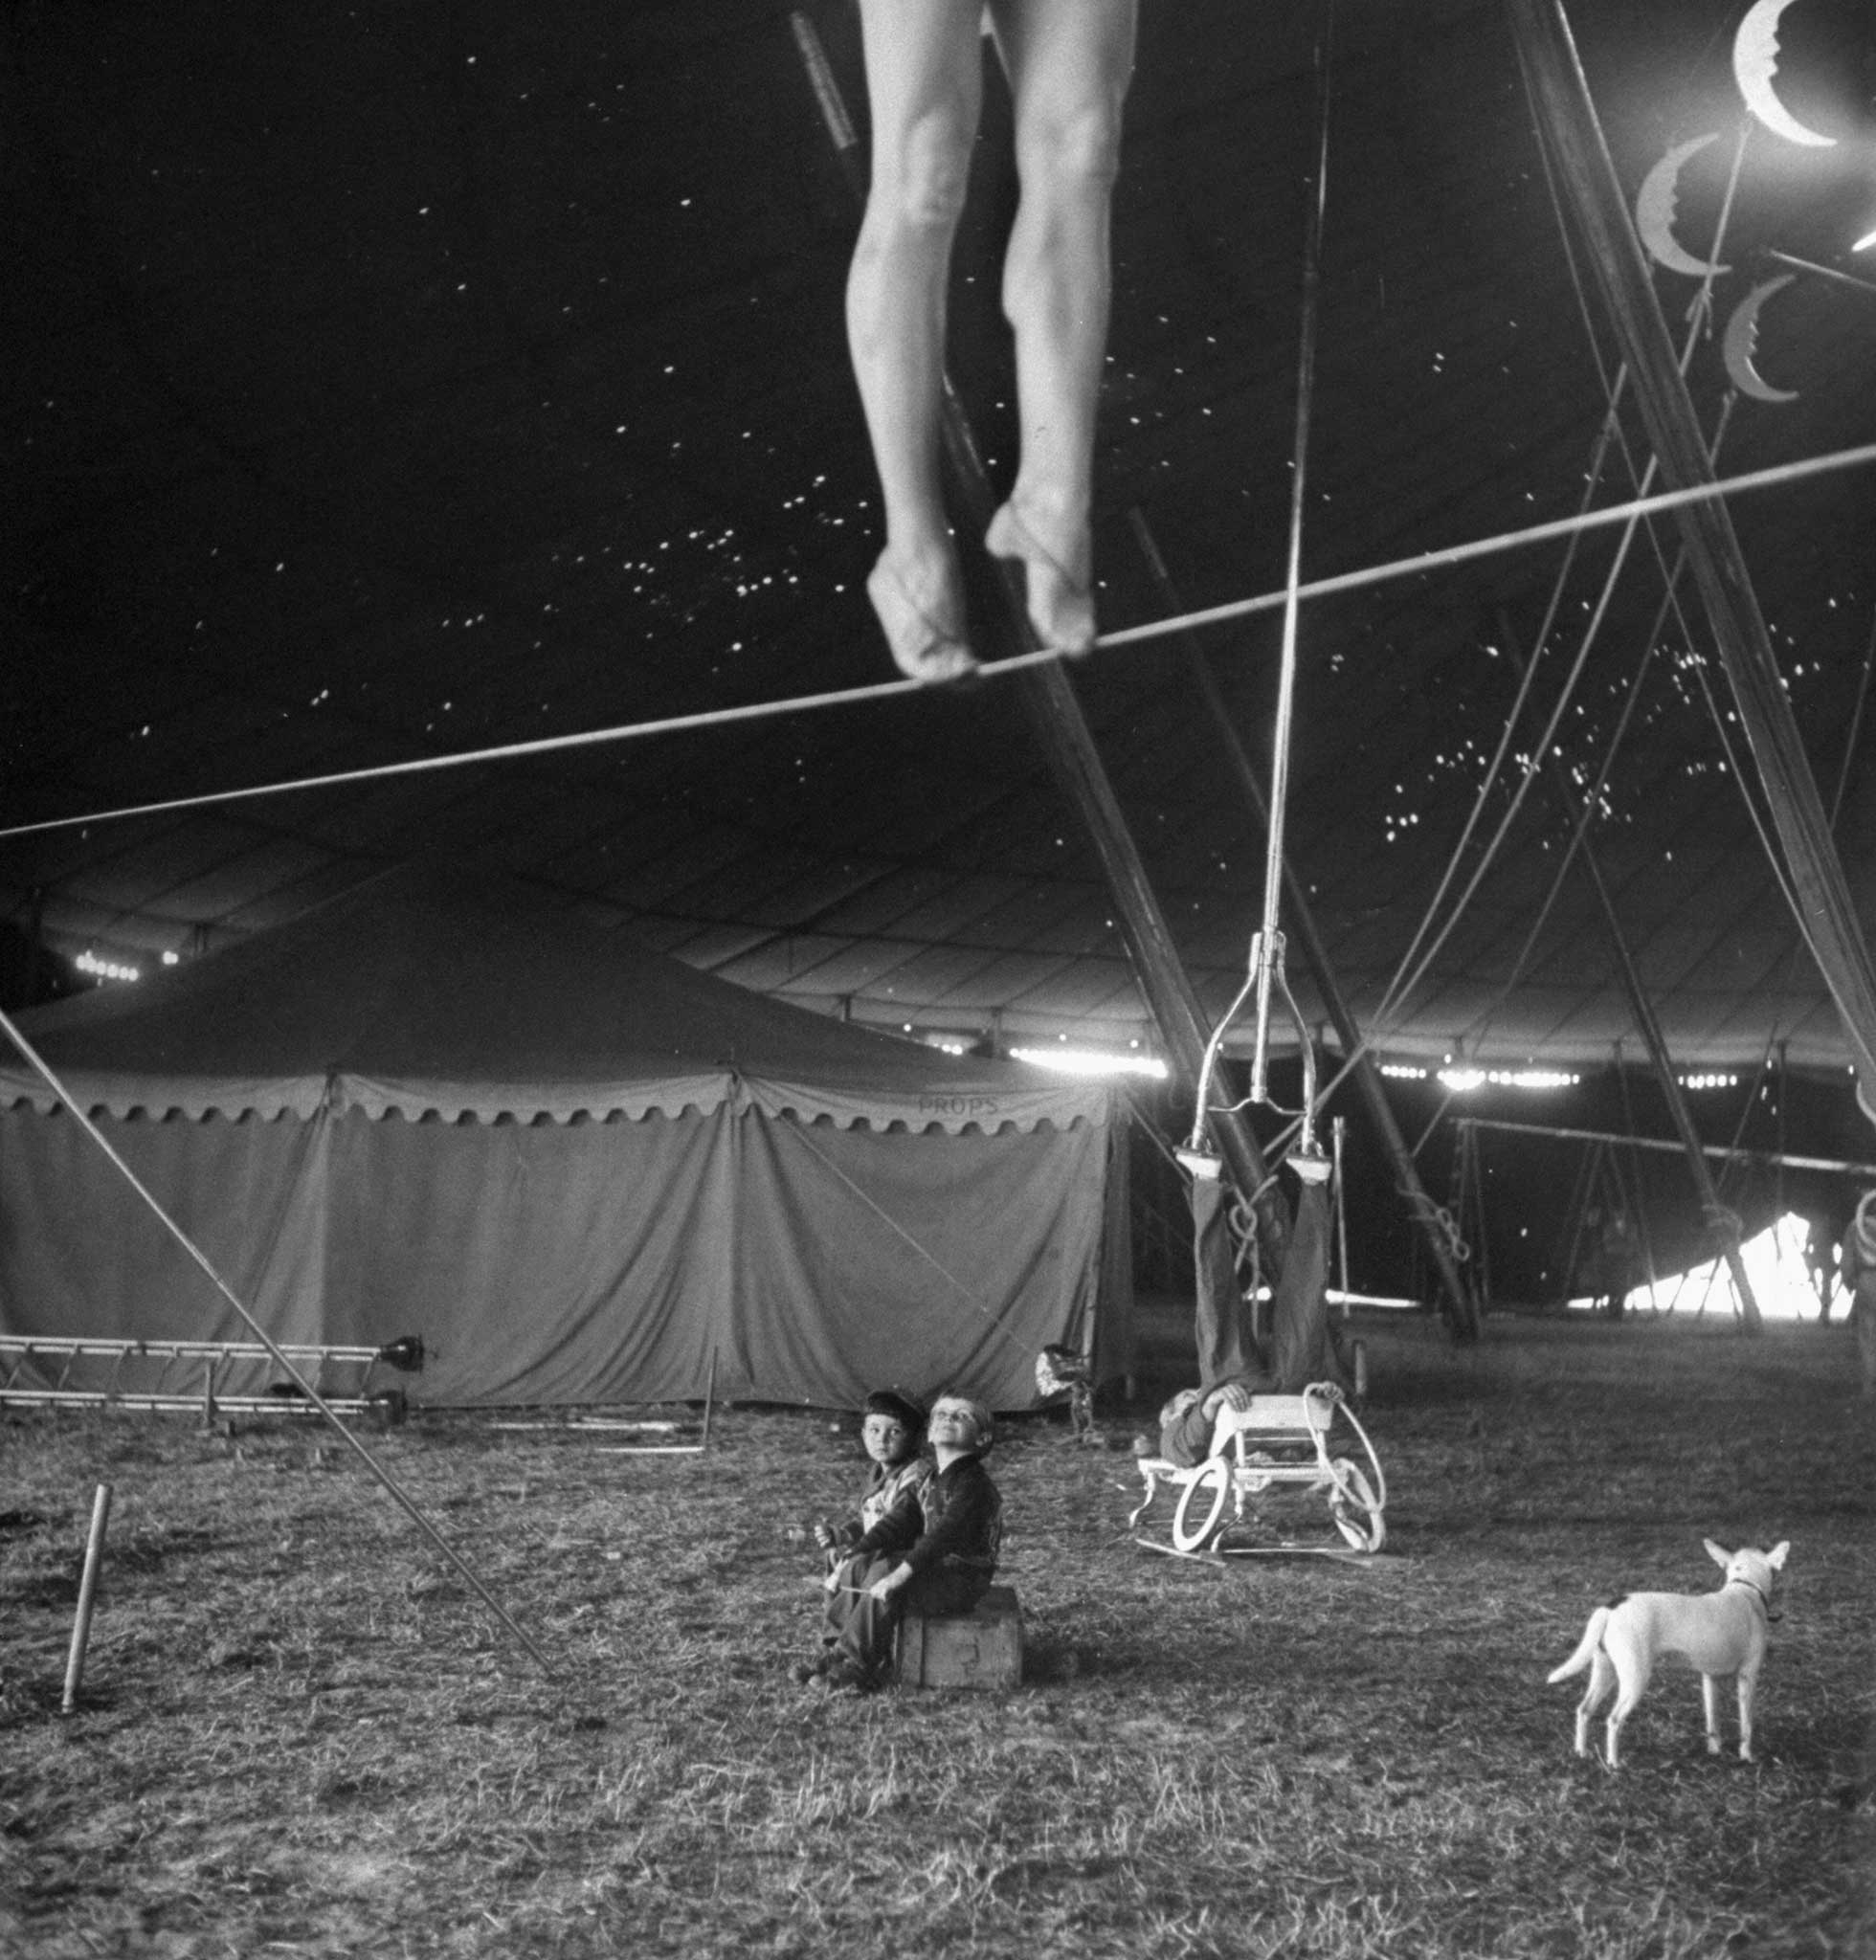 From a story on the Ringling Bros. Circus in the April 4, 1949, issue of LIFE. The caption for this picture: "Nothing but circus all day every day is the happy fate of these two performers' tots, who sit around the big tent watching as the pretty Miss Lola practices on a tightwire and an acrobat balances an odd contraption on his feet."